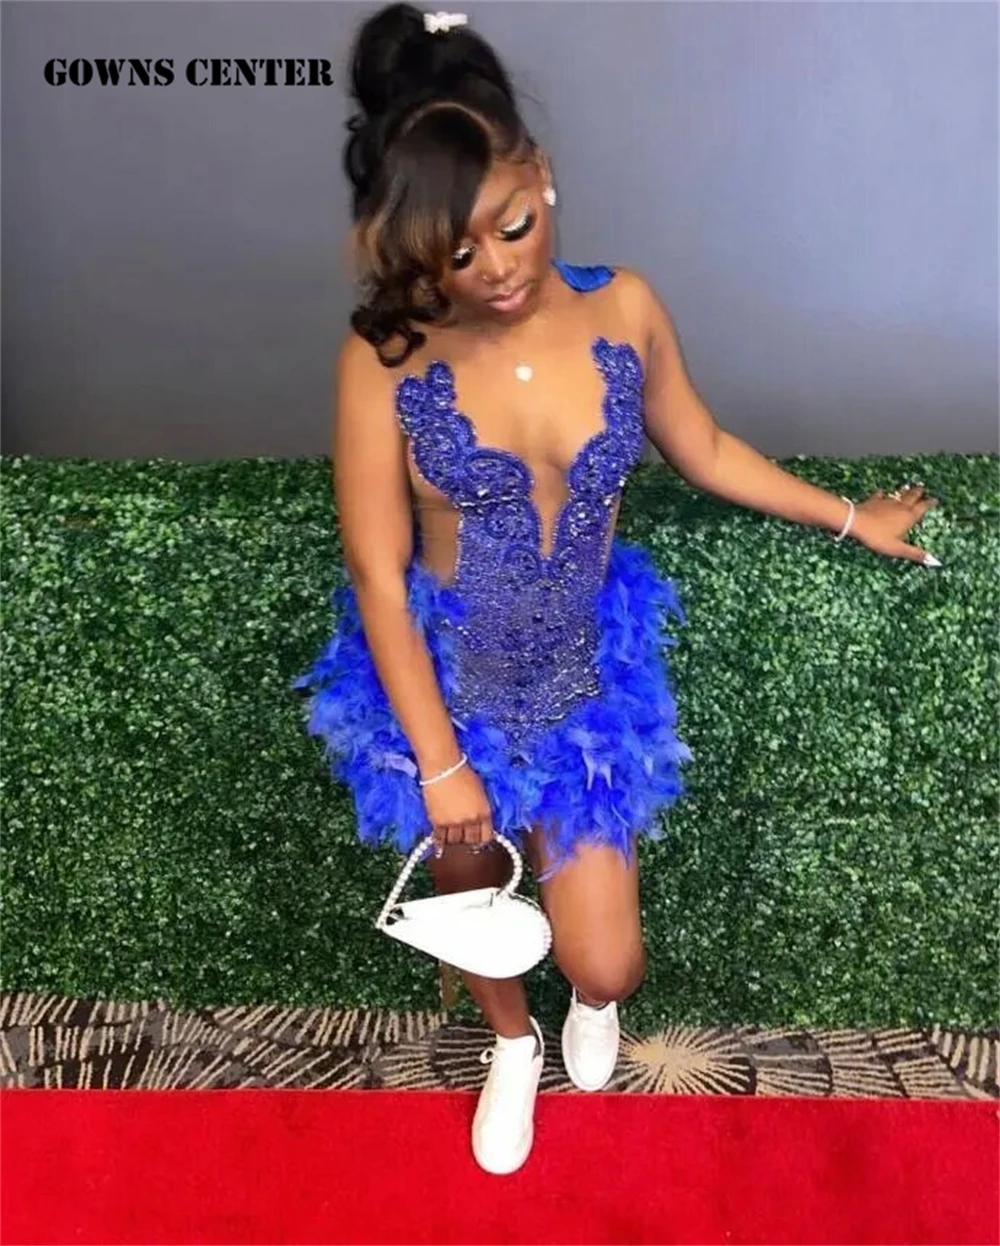 

Royal Blue Slay Queen Short Prom Dresses Sparkly Luxury Crystal Beaded Ostrich Feather Black Girl Birthday Gown Outfit robe